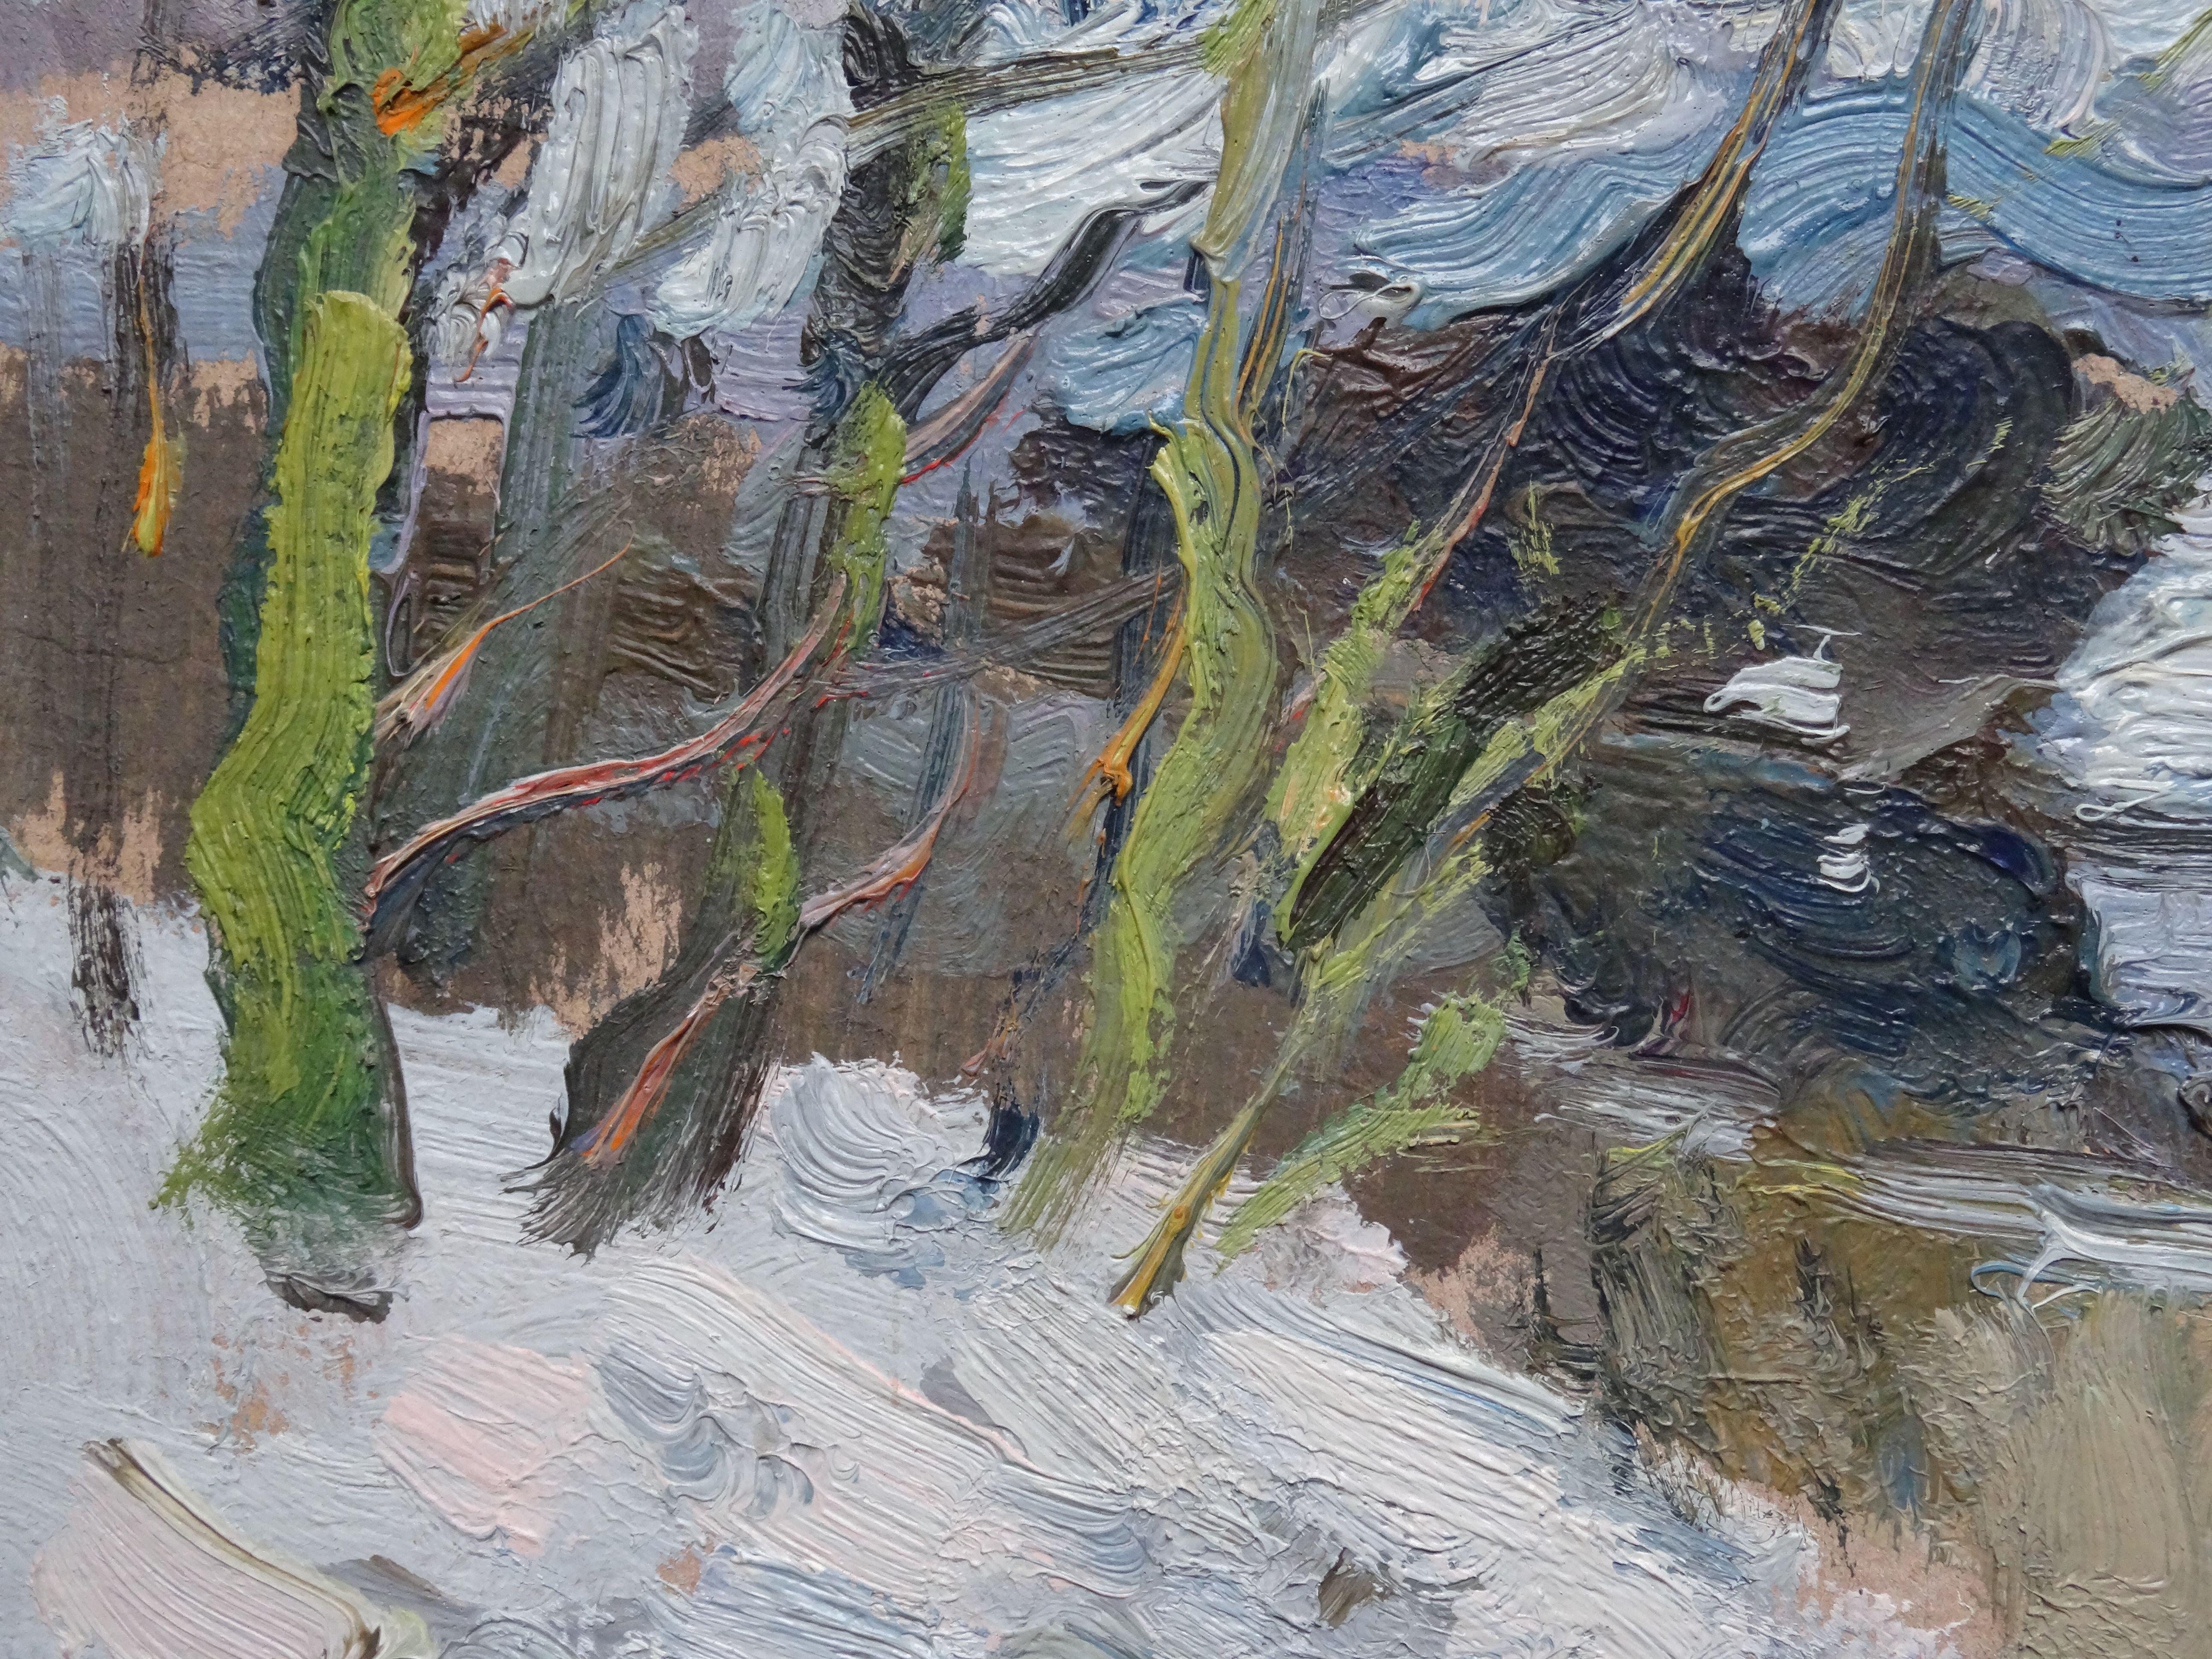 River in winter. 1987, oil on board, 40x50 cm - Painting by Edgars Vinters